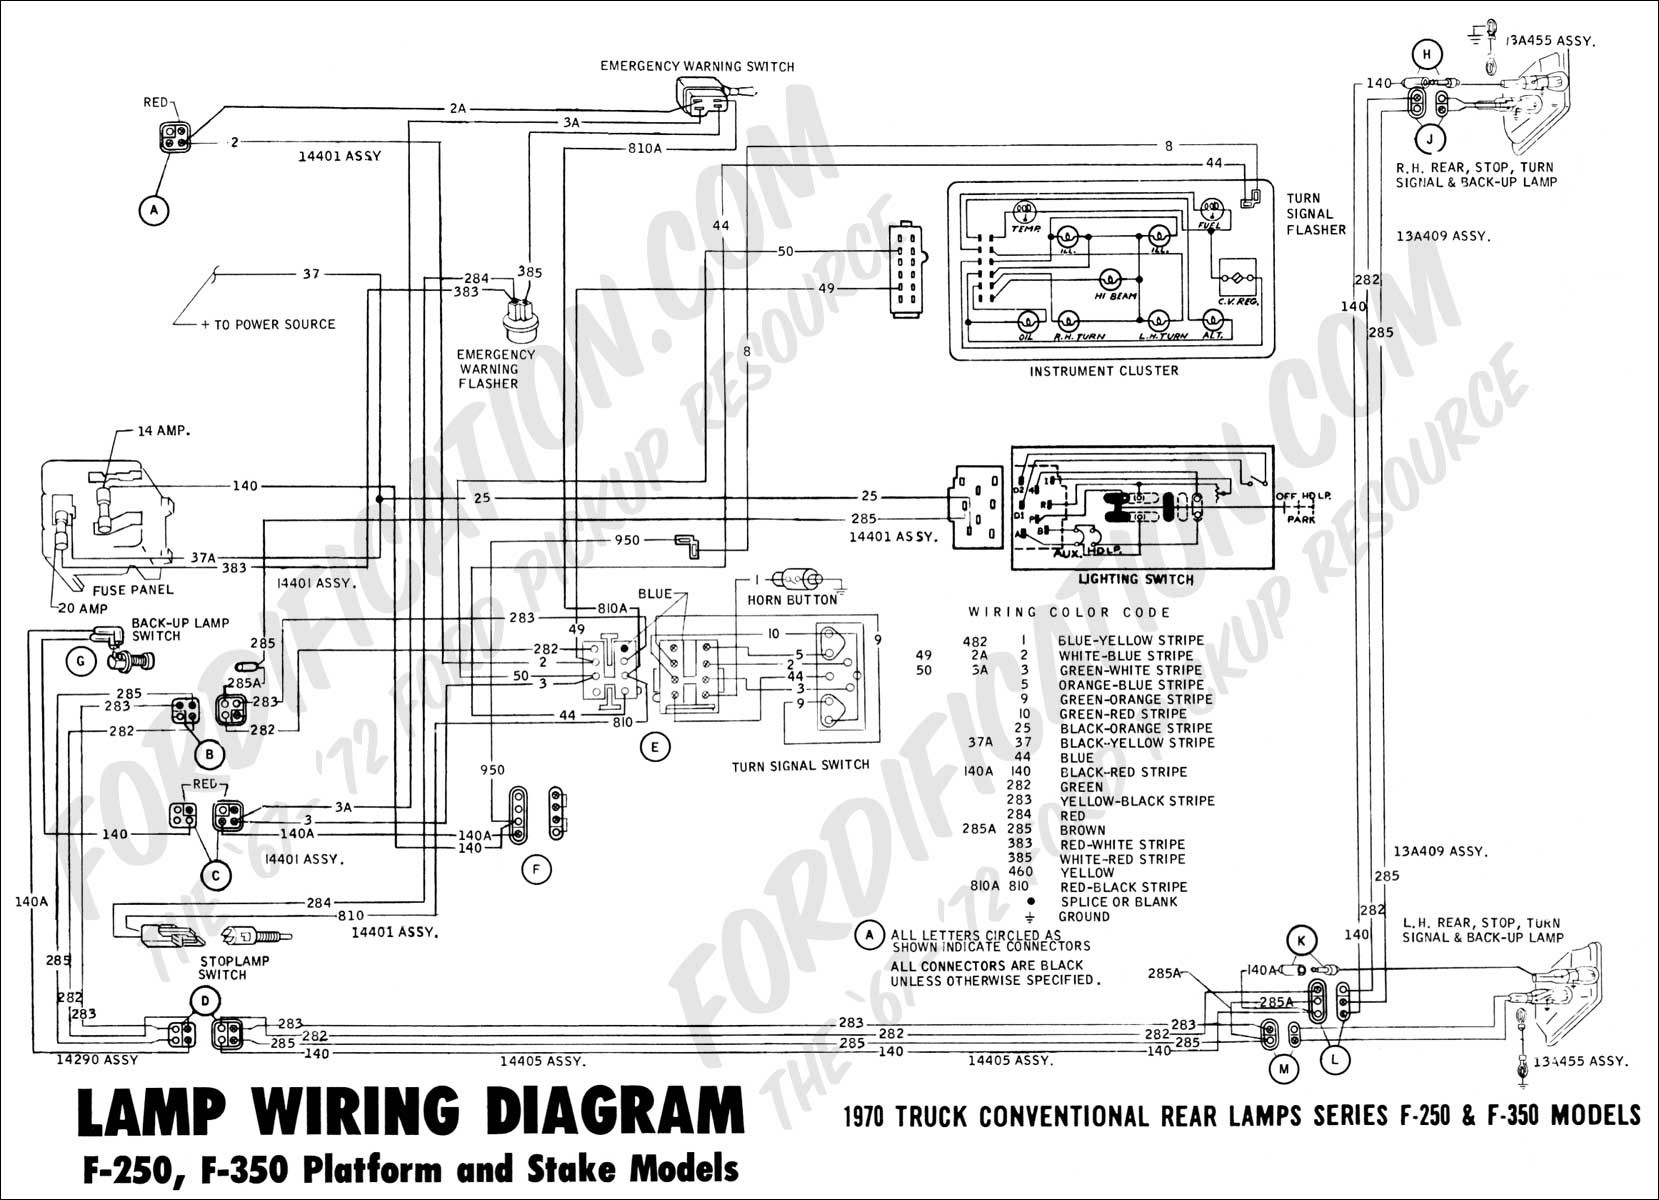 1994 ford Ranger Wiring Diagram ford Truck Technical Drawings and Schematics Section H Wiring Of 1994 ford Ranger Wiring Diagram